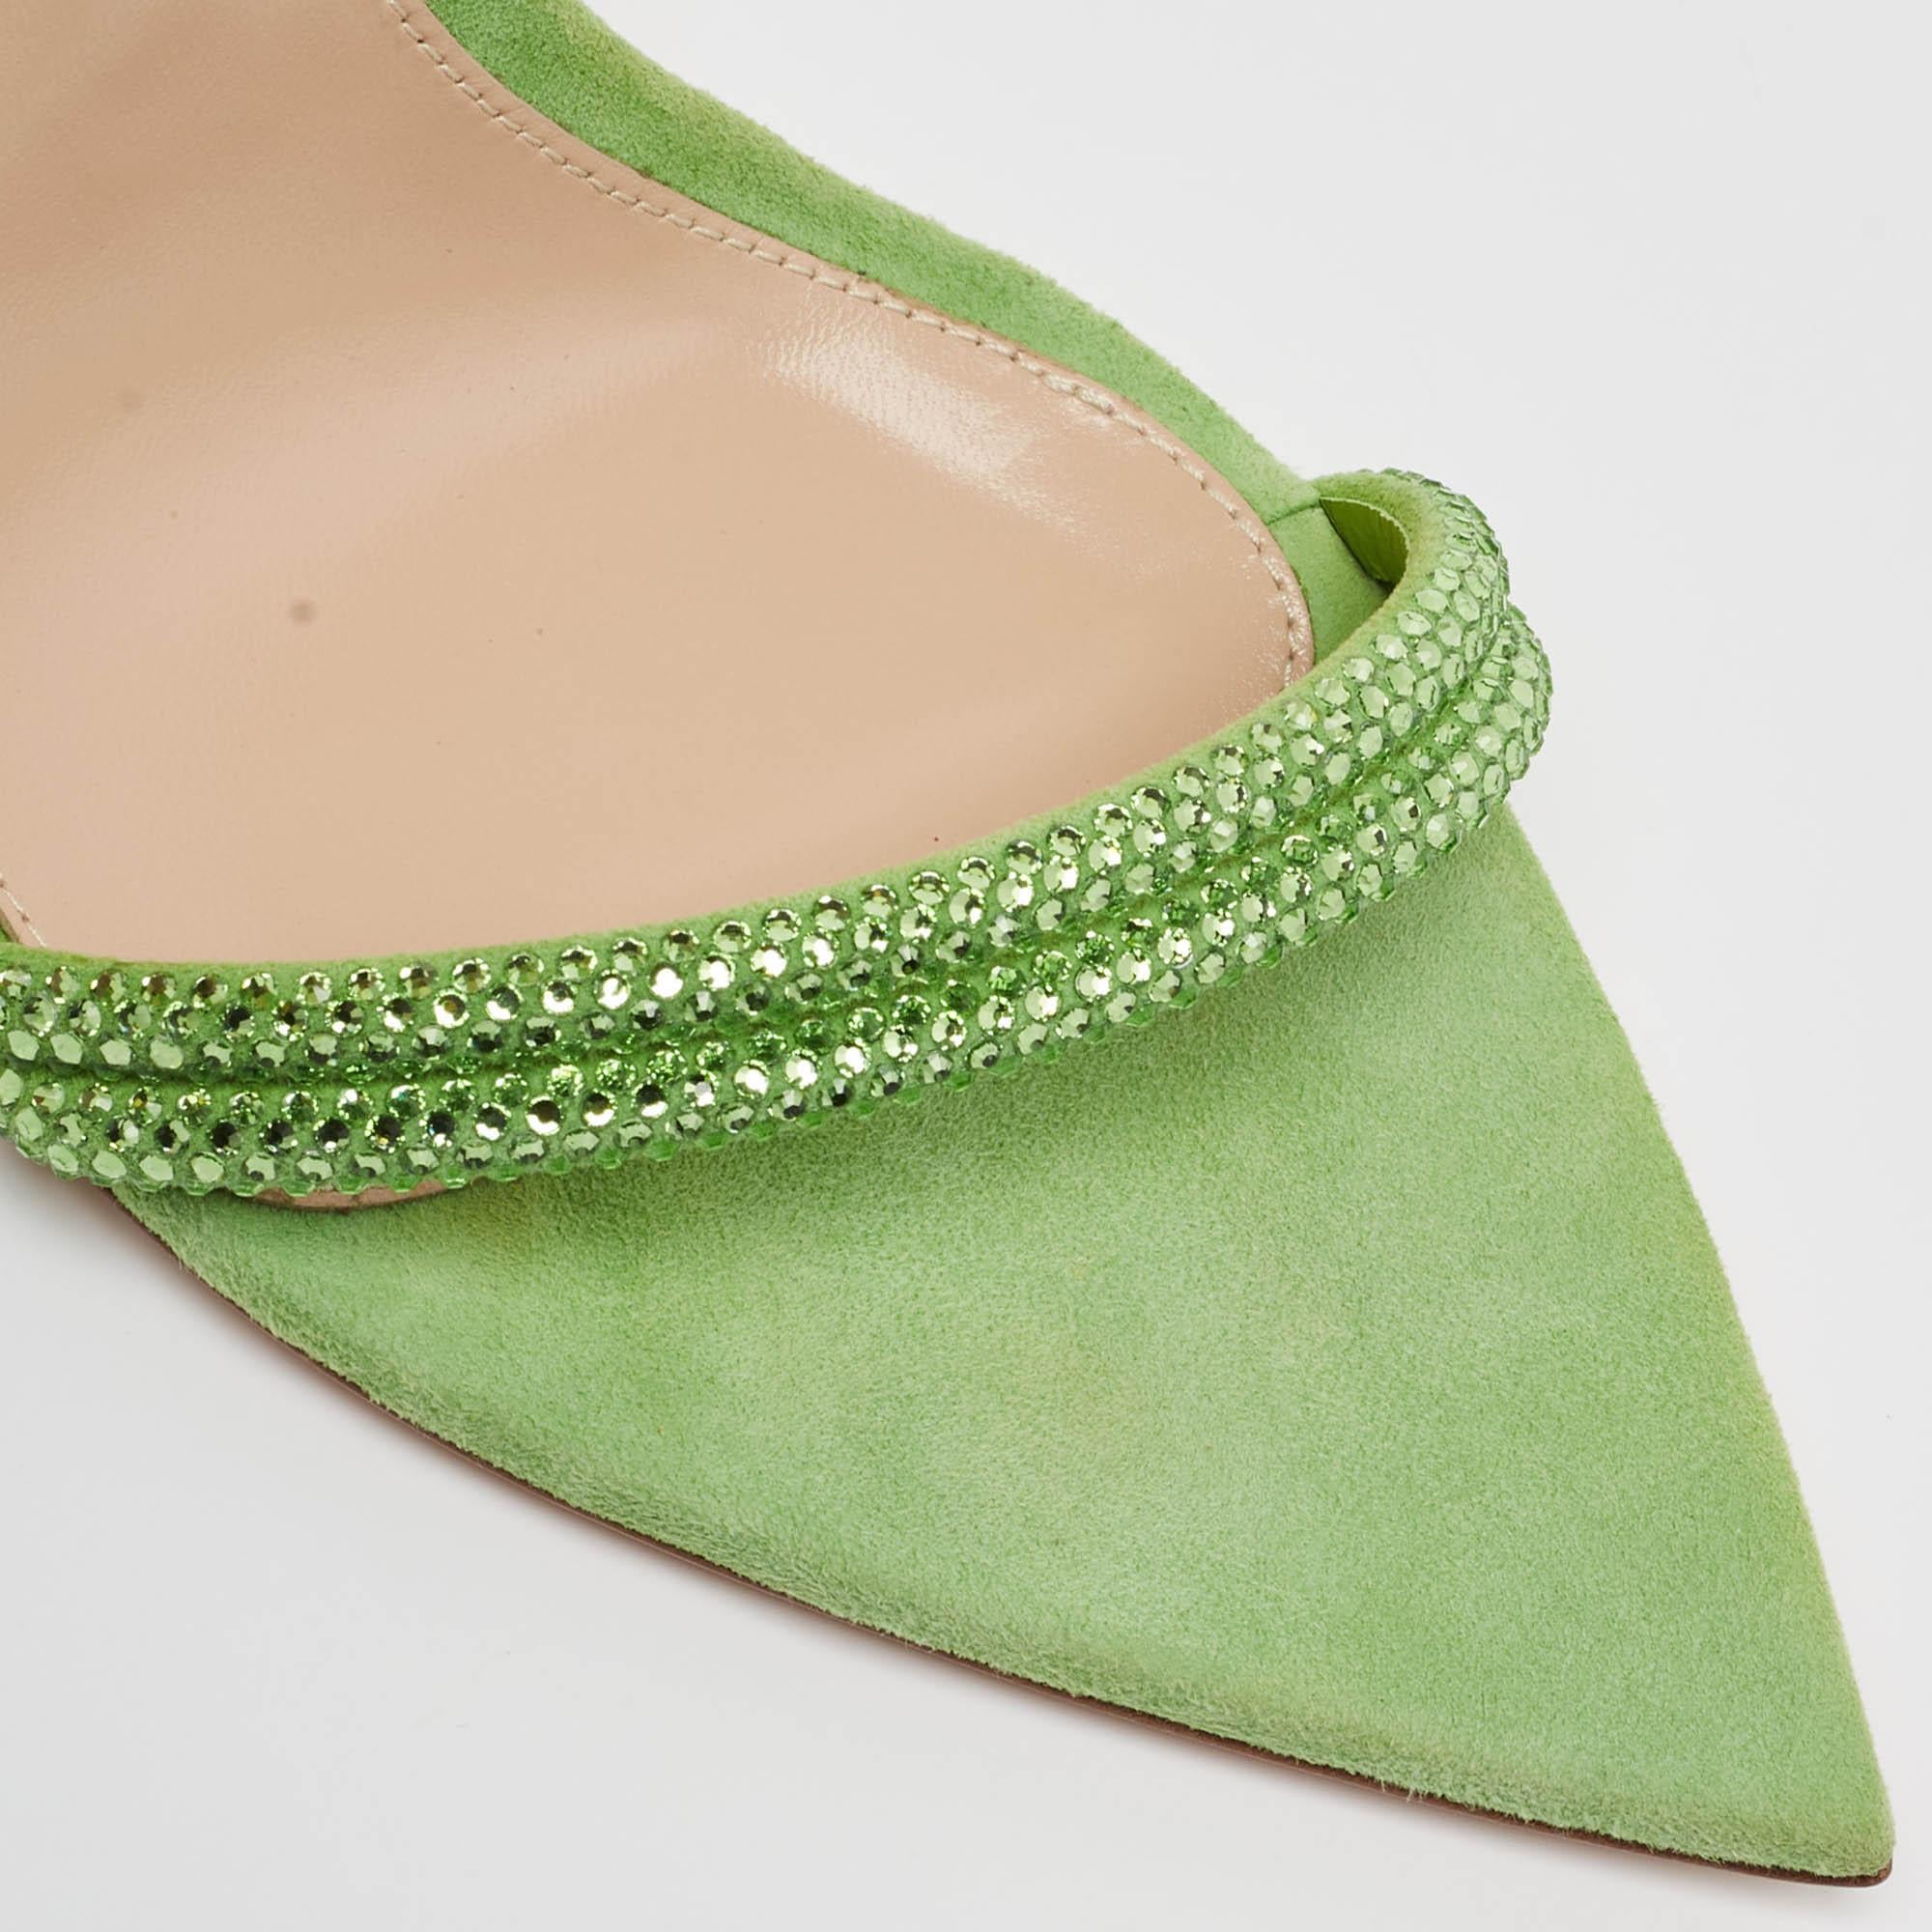 In classy green suede, the Gianvito Rossi Montecarlo sandals exude confident charm. Delicate straps gracefully embrace the foot, while a sturdy heel provides stability and style. With impeccable craftsmanship and timeless design, these sandals